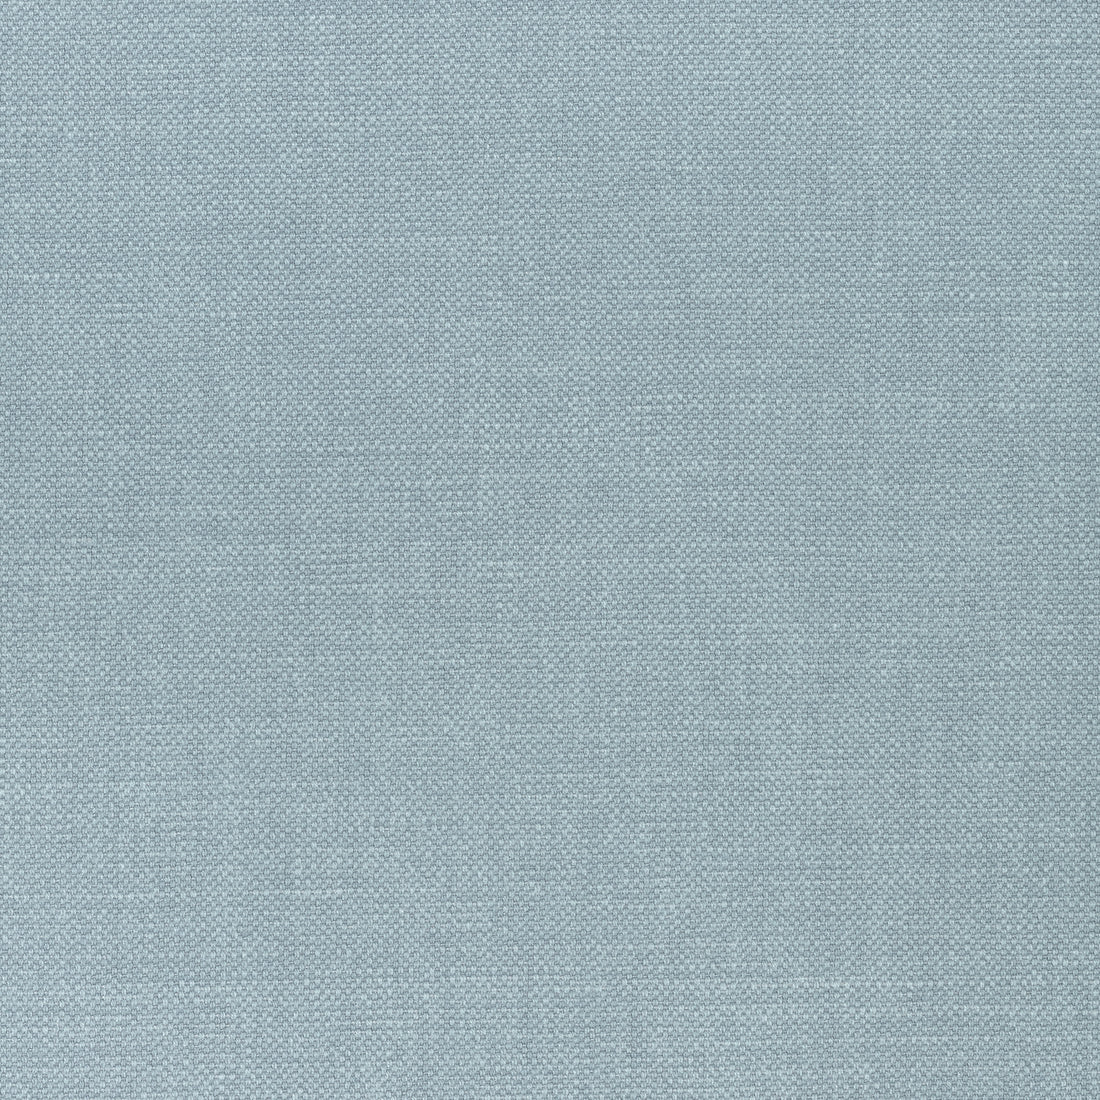 Prisma fabric in slate color - pattern number W70160 - by Thibaut in the Woven Resource Vol 12 Prisma Fabrics collection